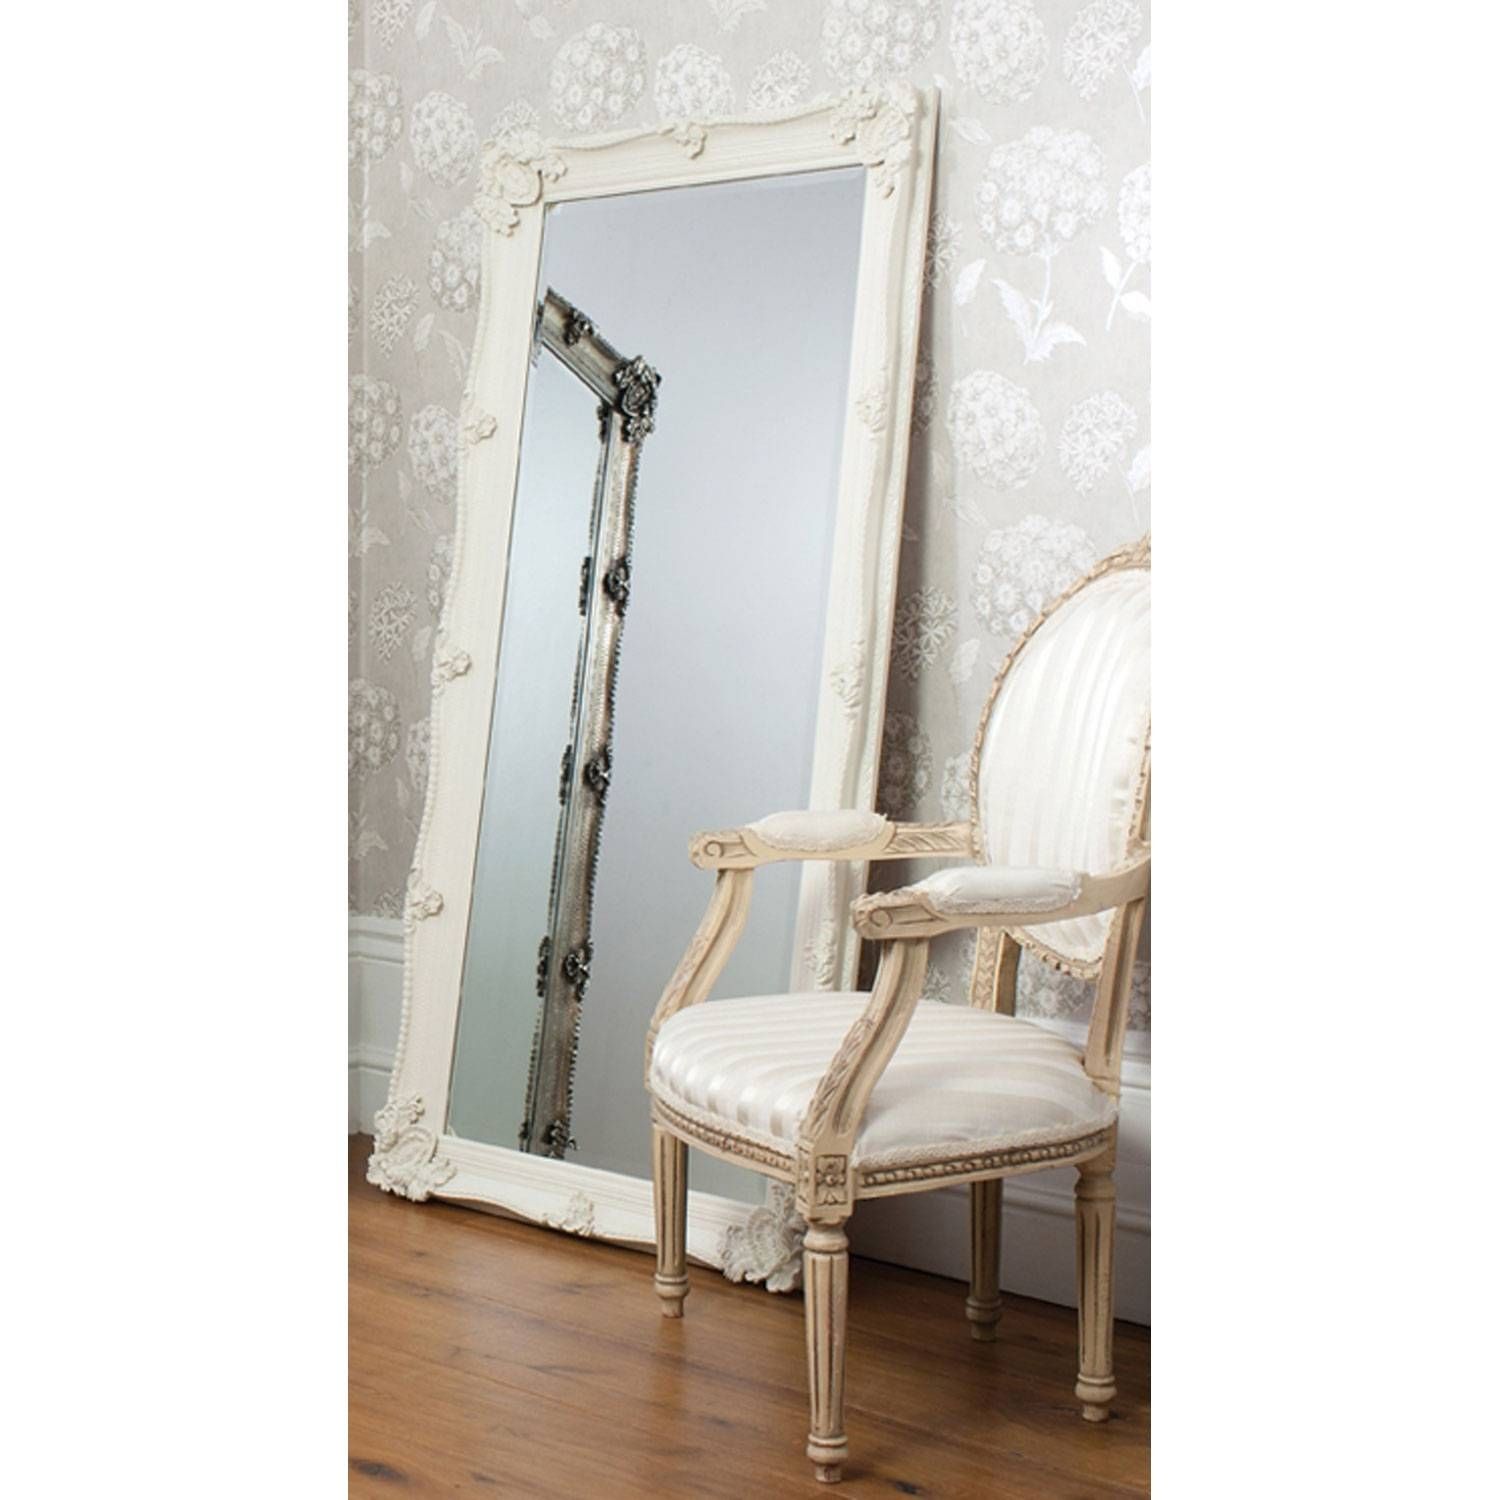 Large Free Standing Mirror 149 Cool Ideas For Large Antique Free For Cream Free Standing Mirrors (View 4 of 25)